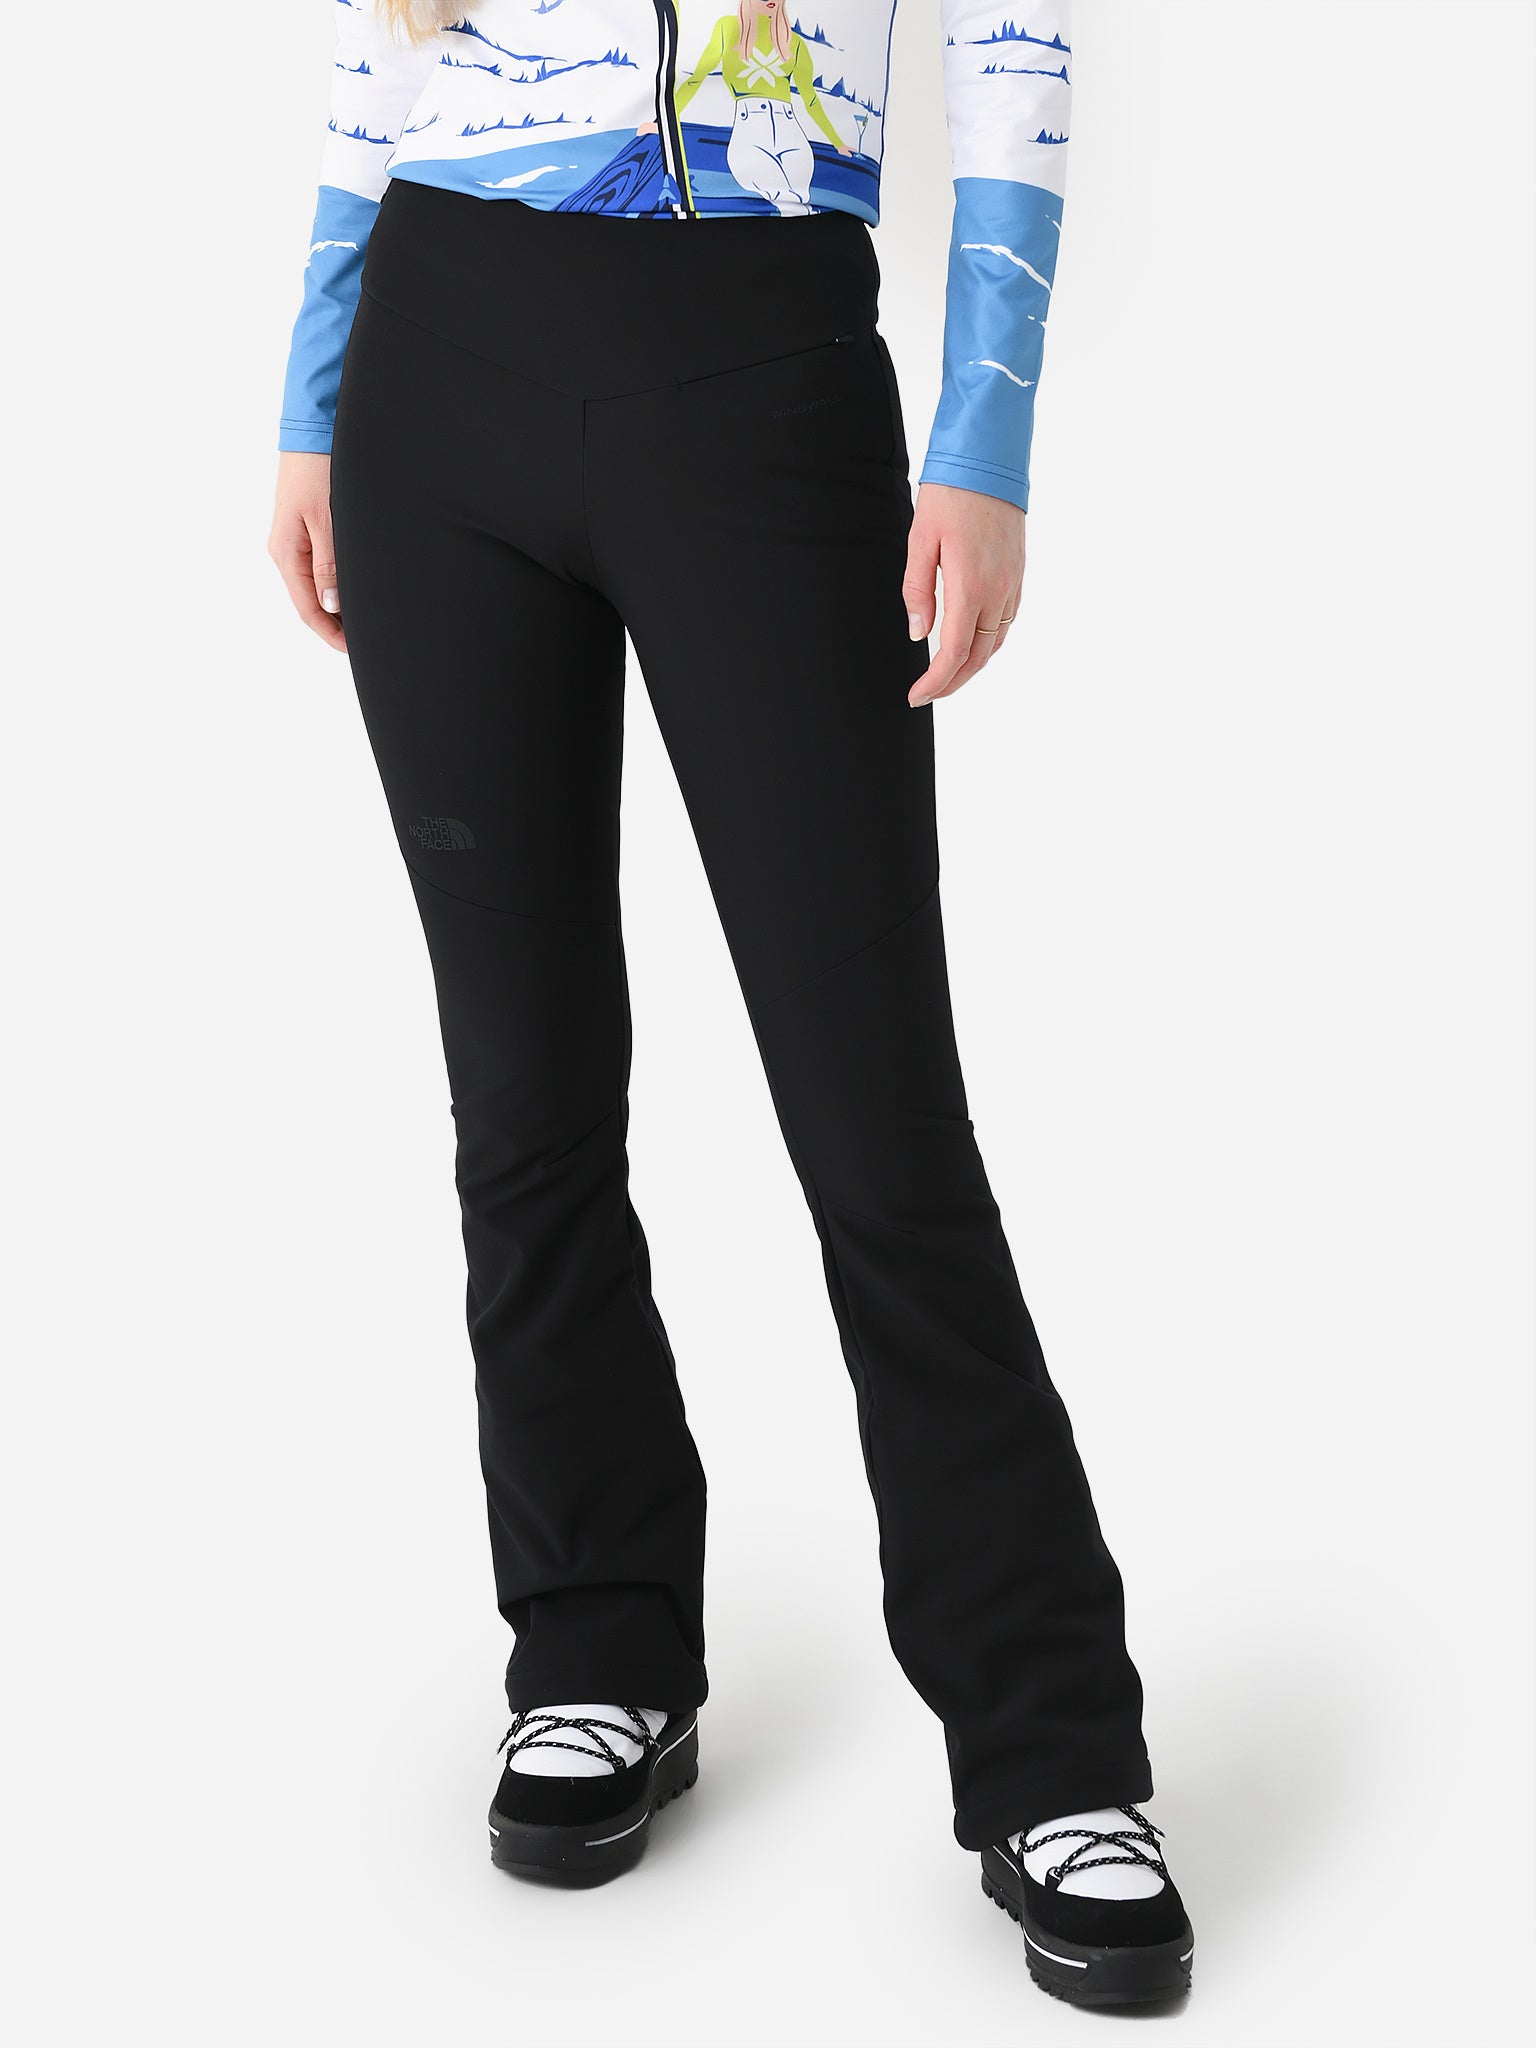 The North Face Apex STH Pant - Women's - Clothing